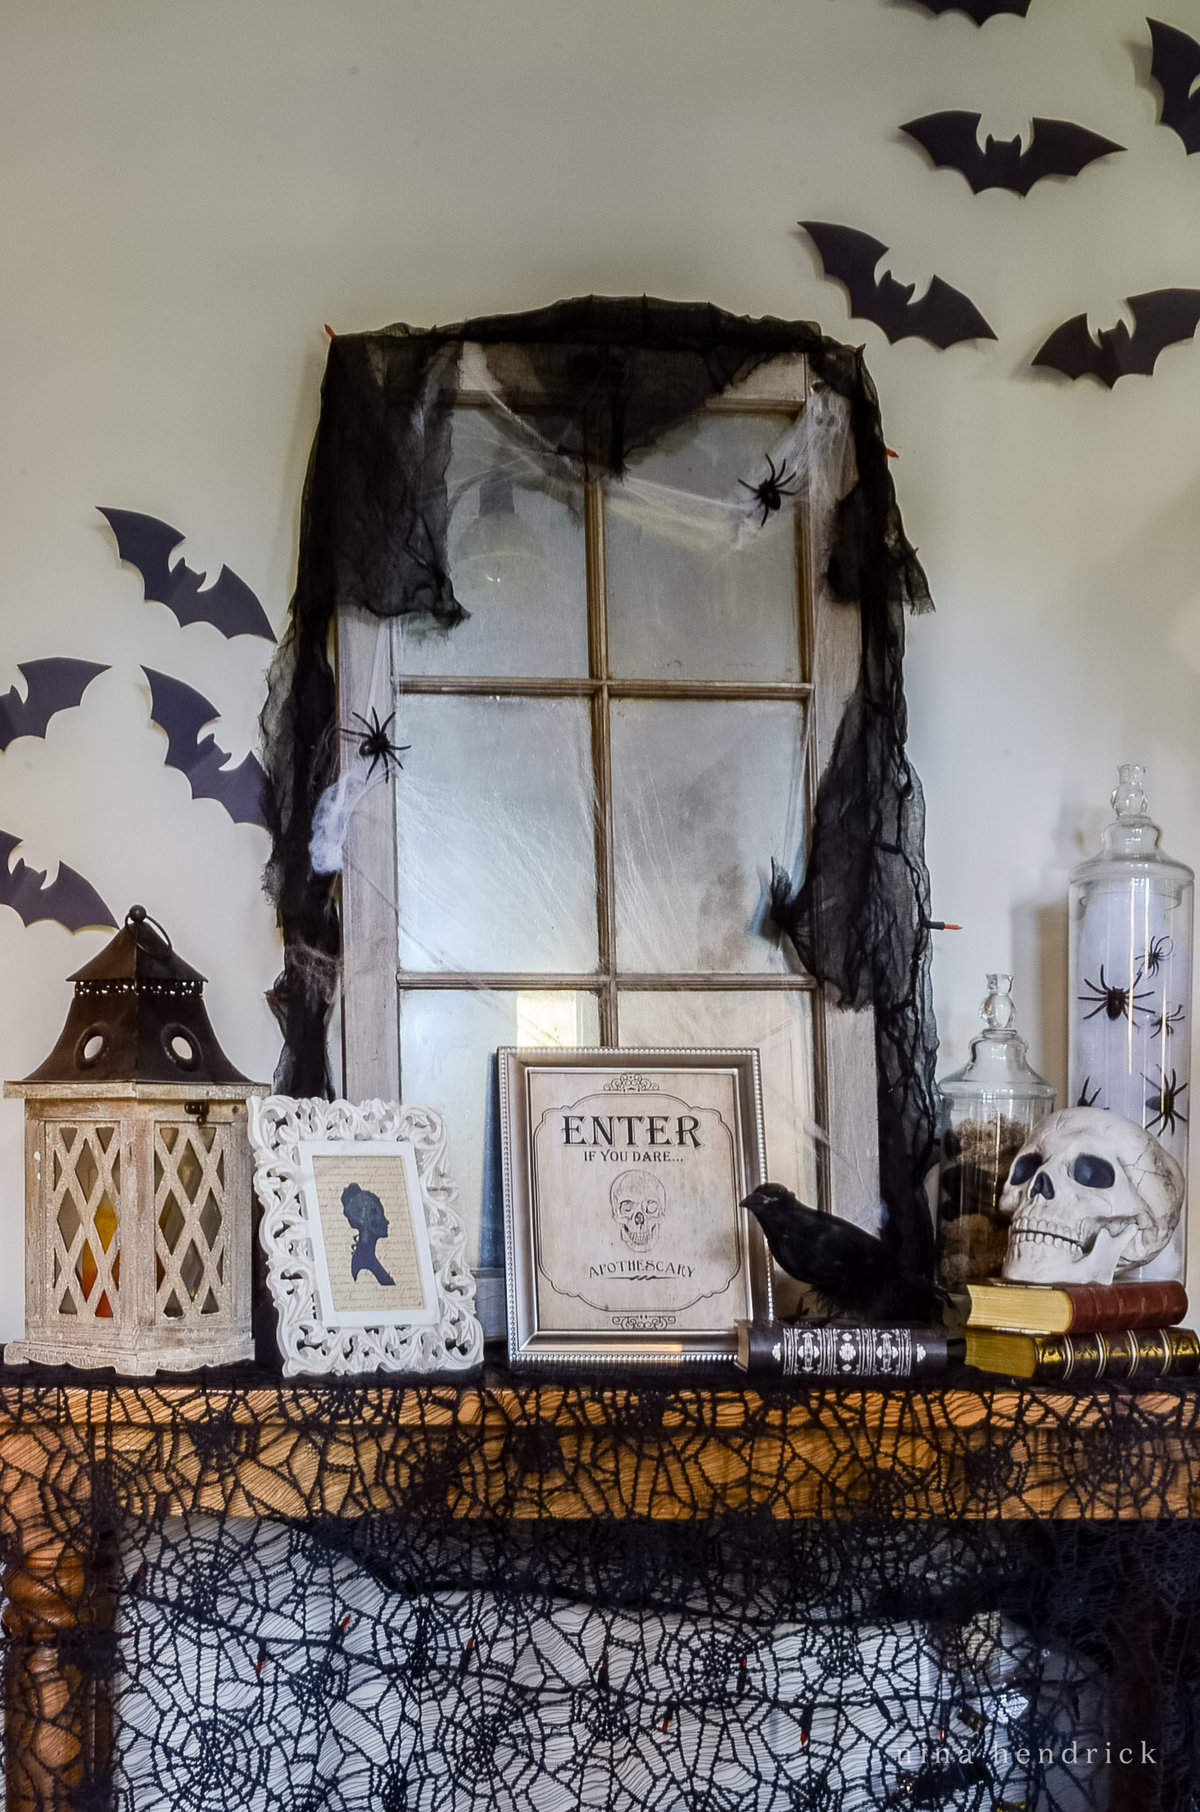 Get inspired with this spooktacular Halloween foyer, adorned with bats and spider webs.